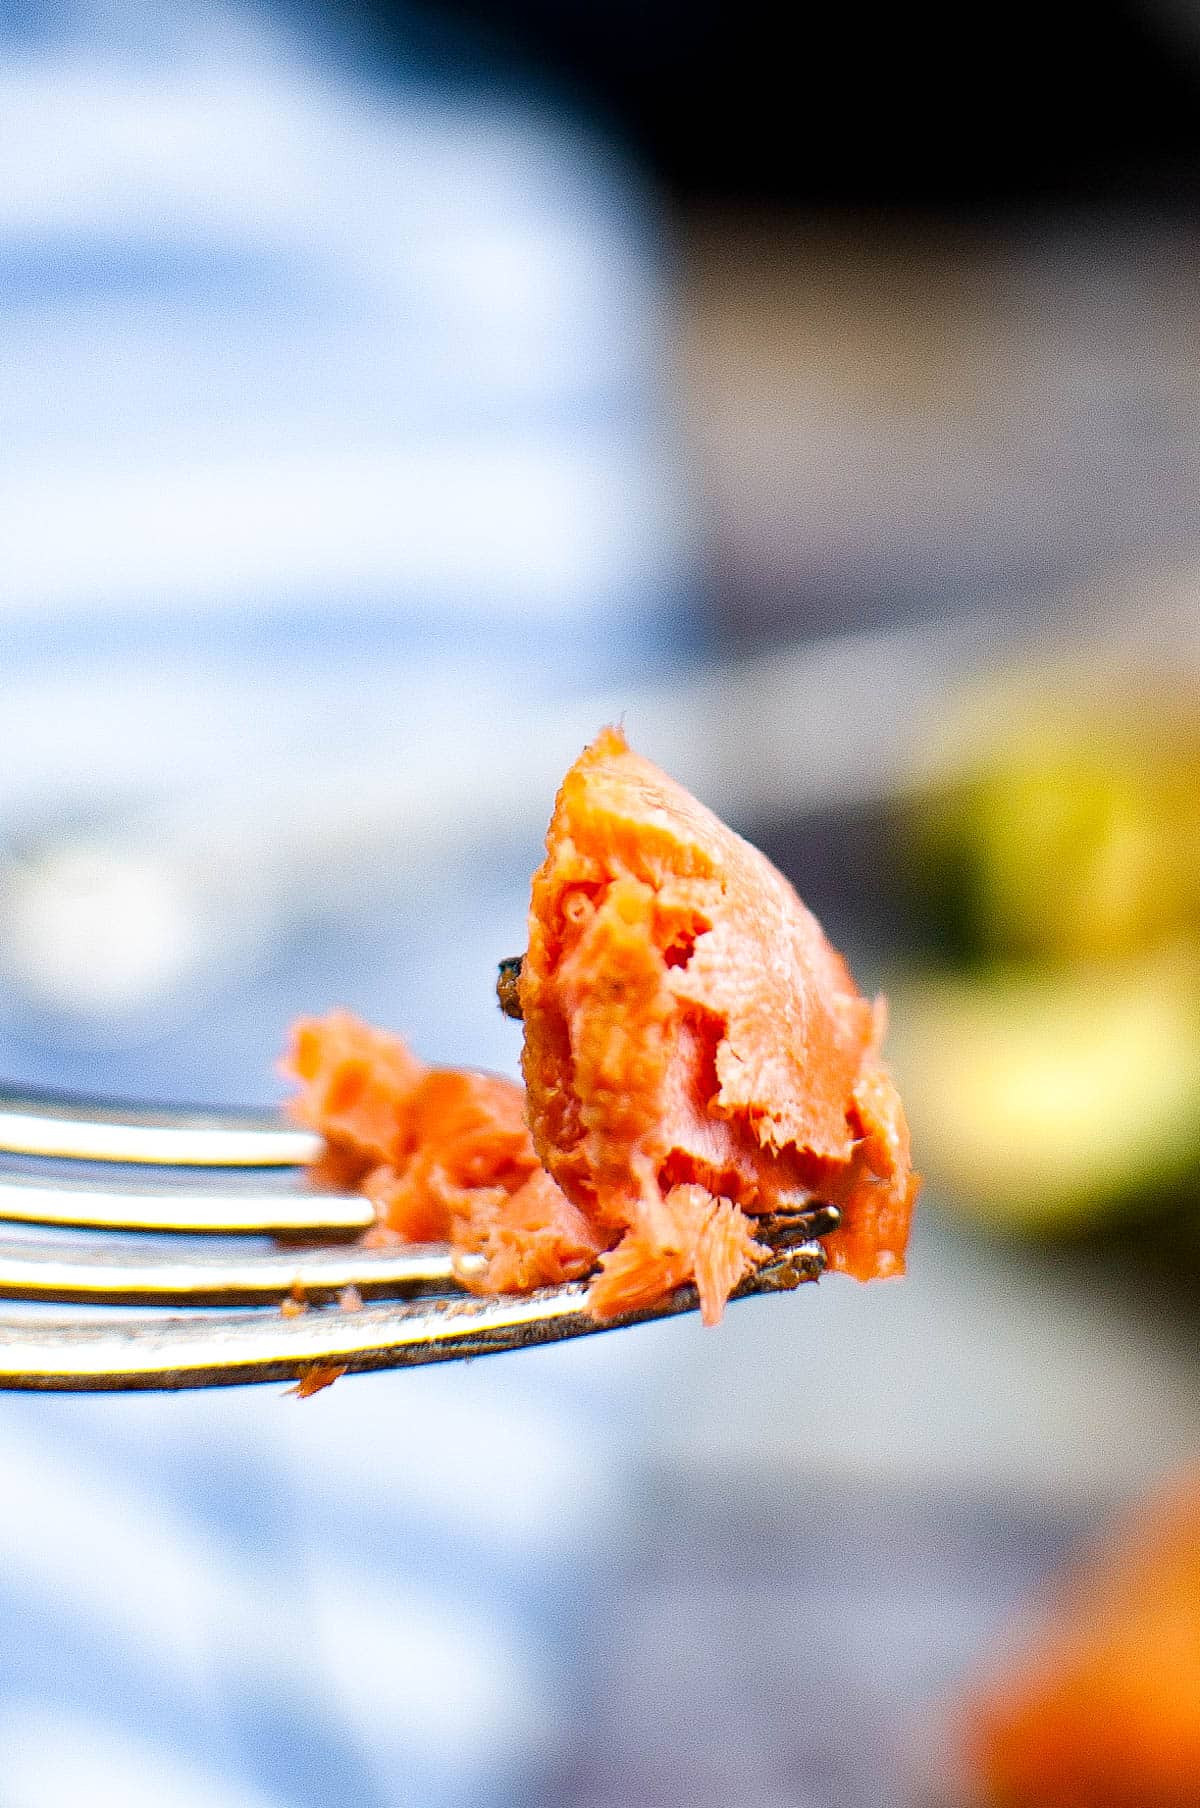 Shot of a bite of salmon on a fork.